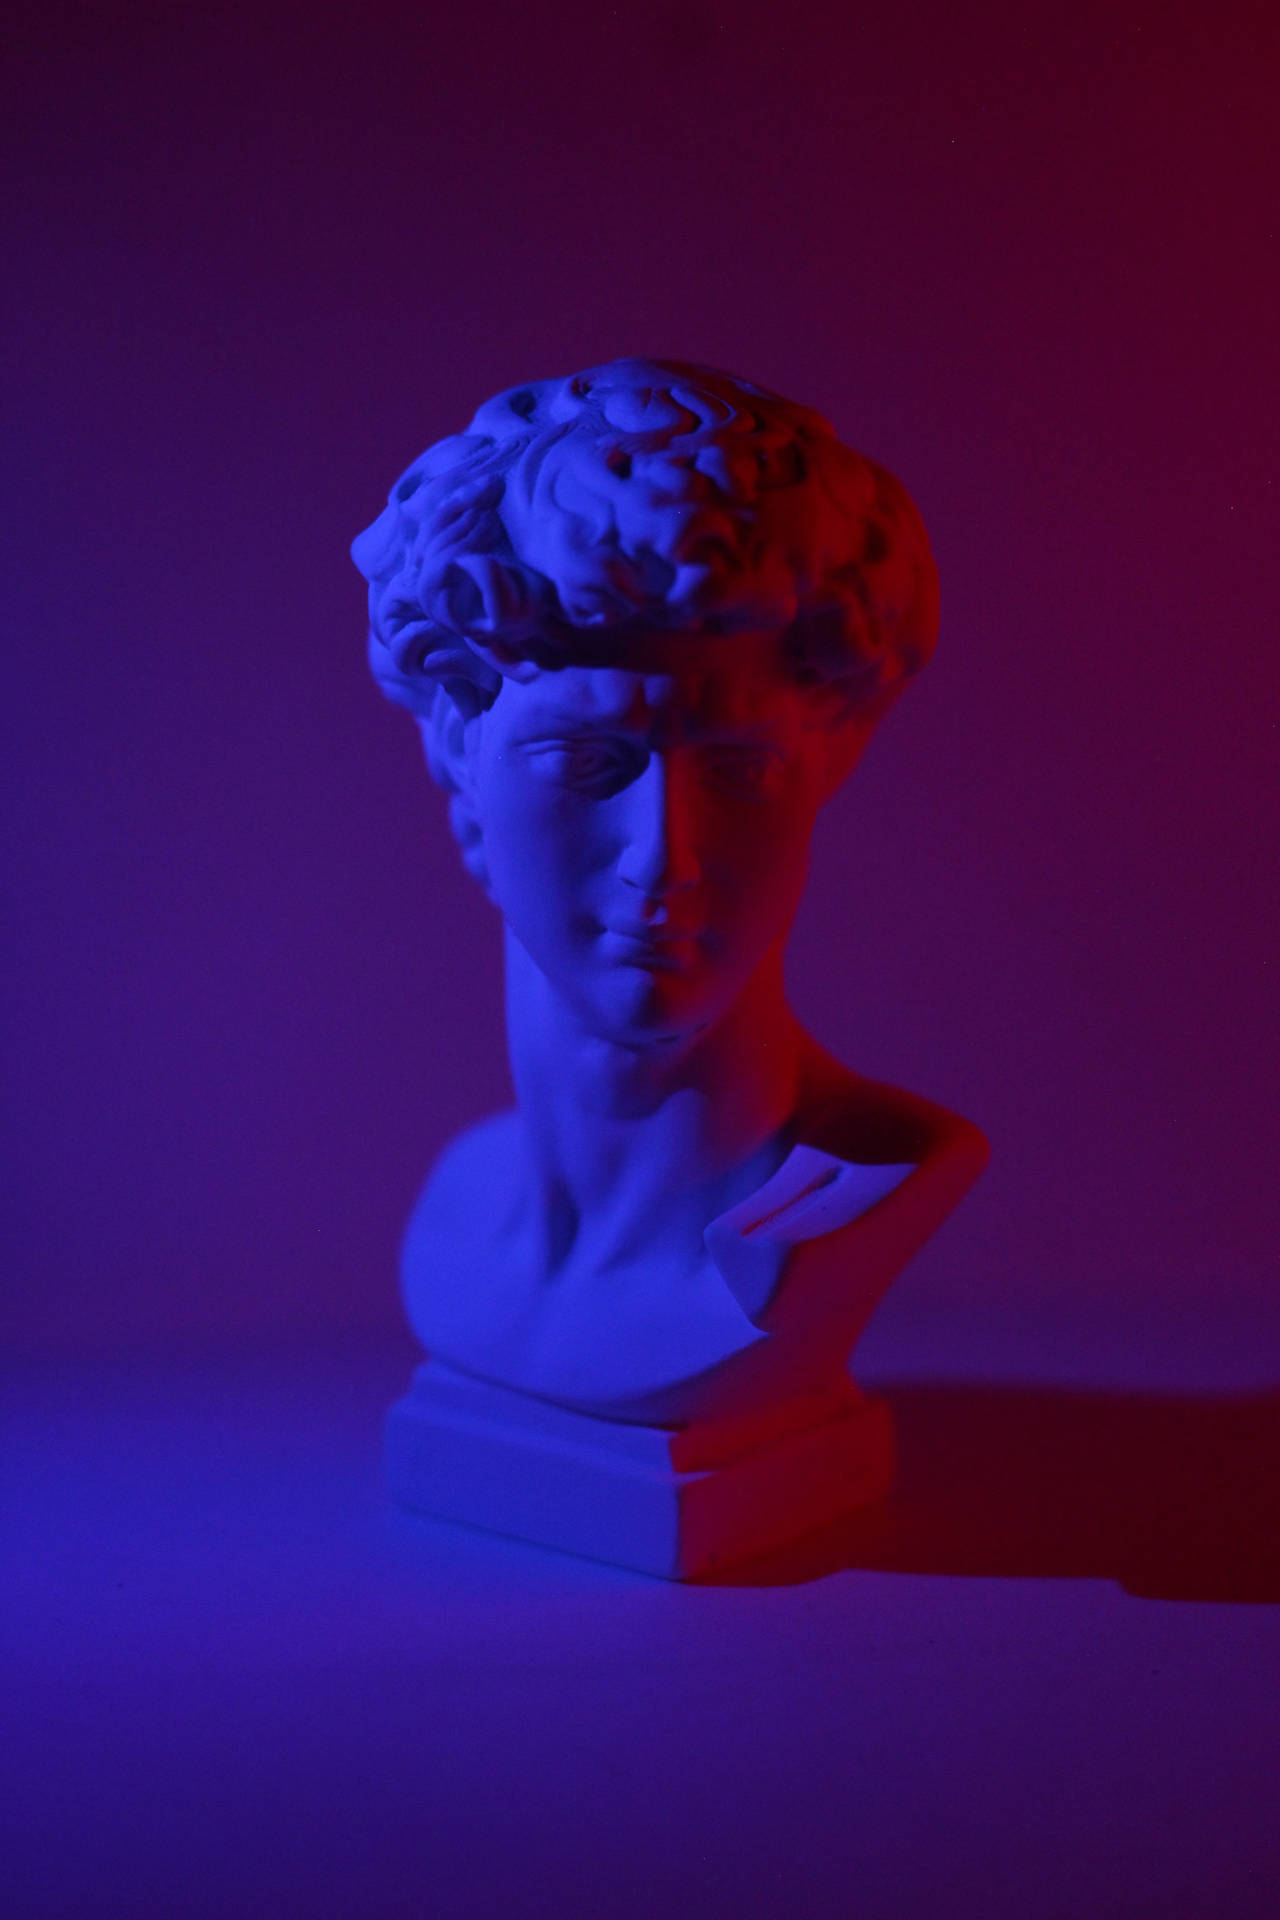 A Bust Of David With Blue And Red Lights Wallpaper